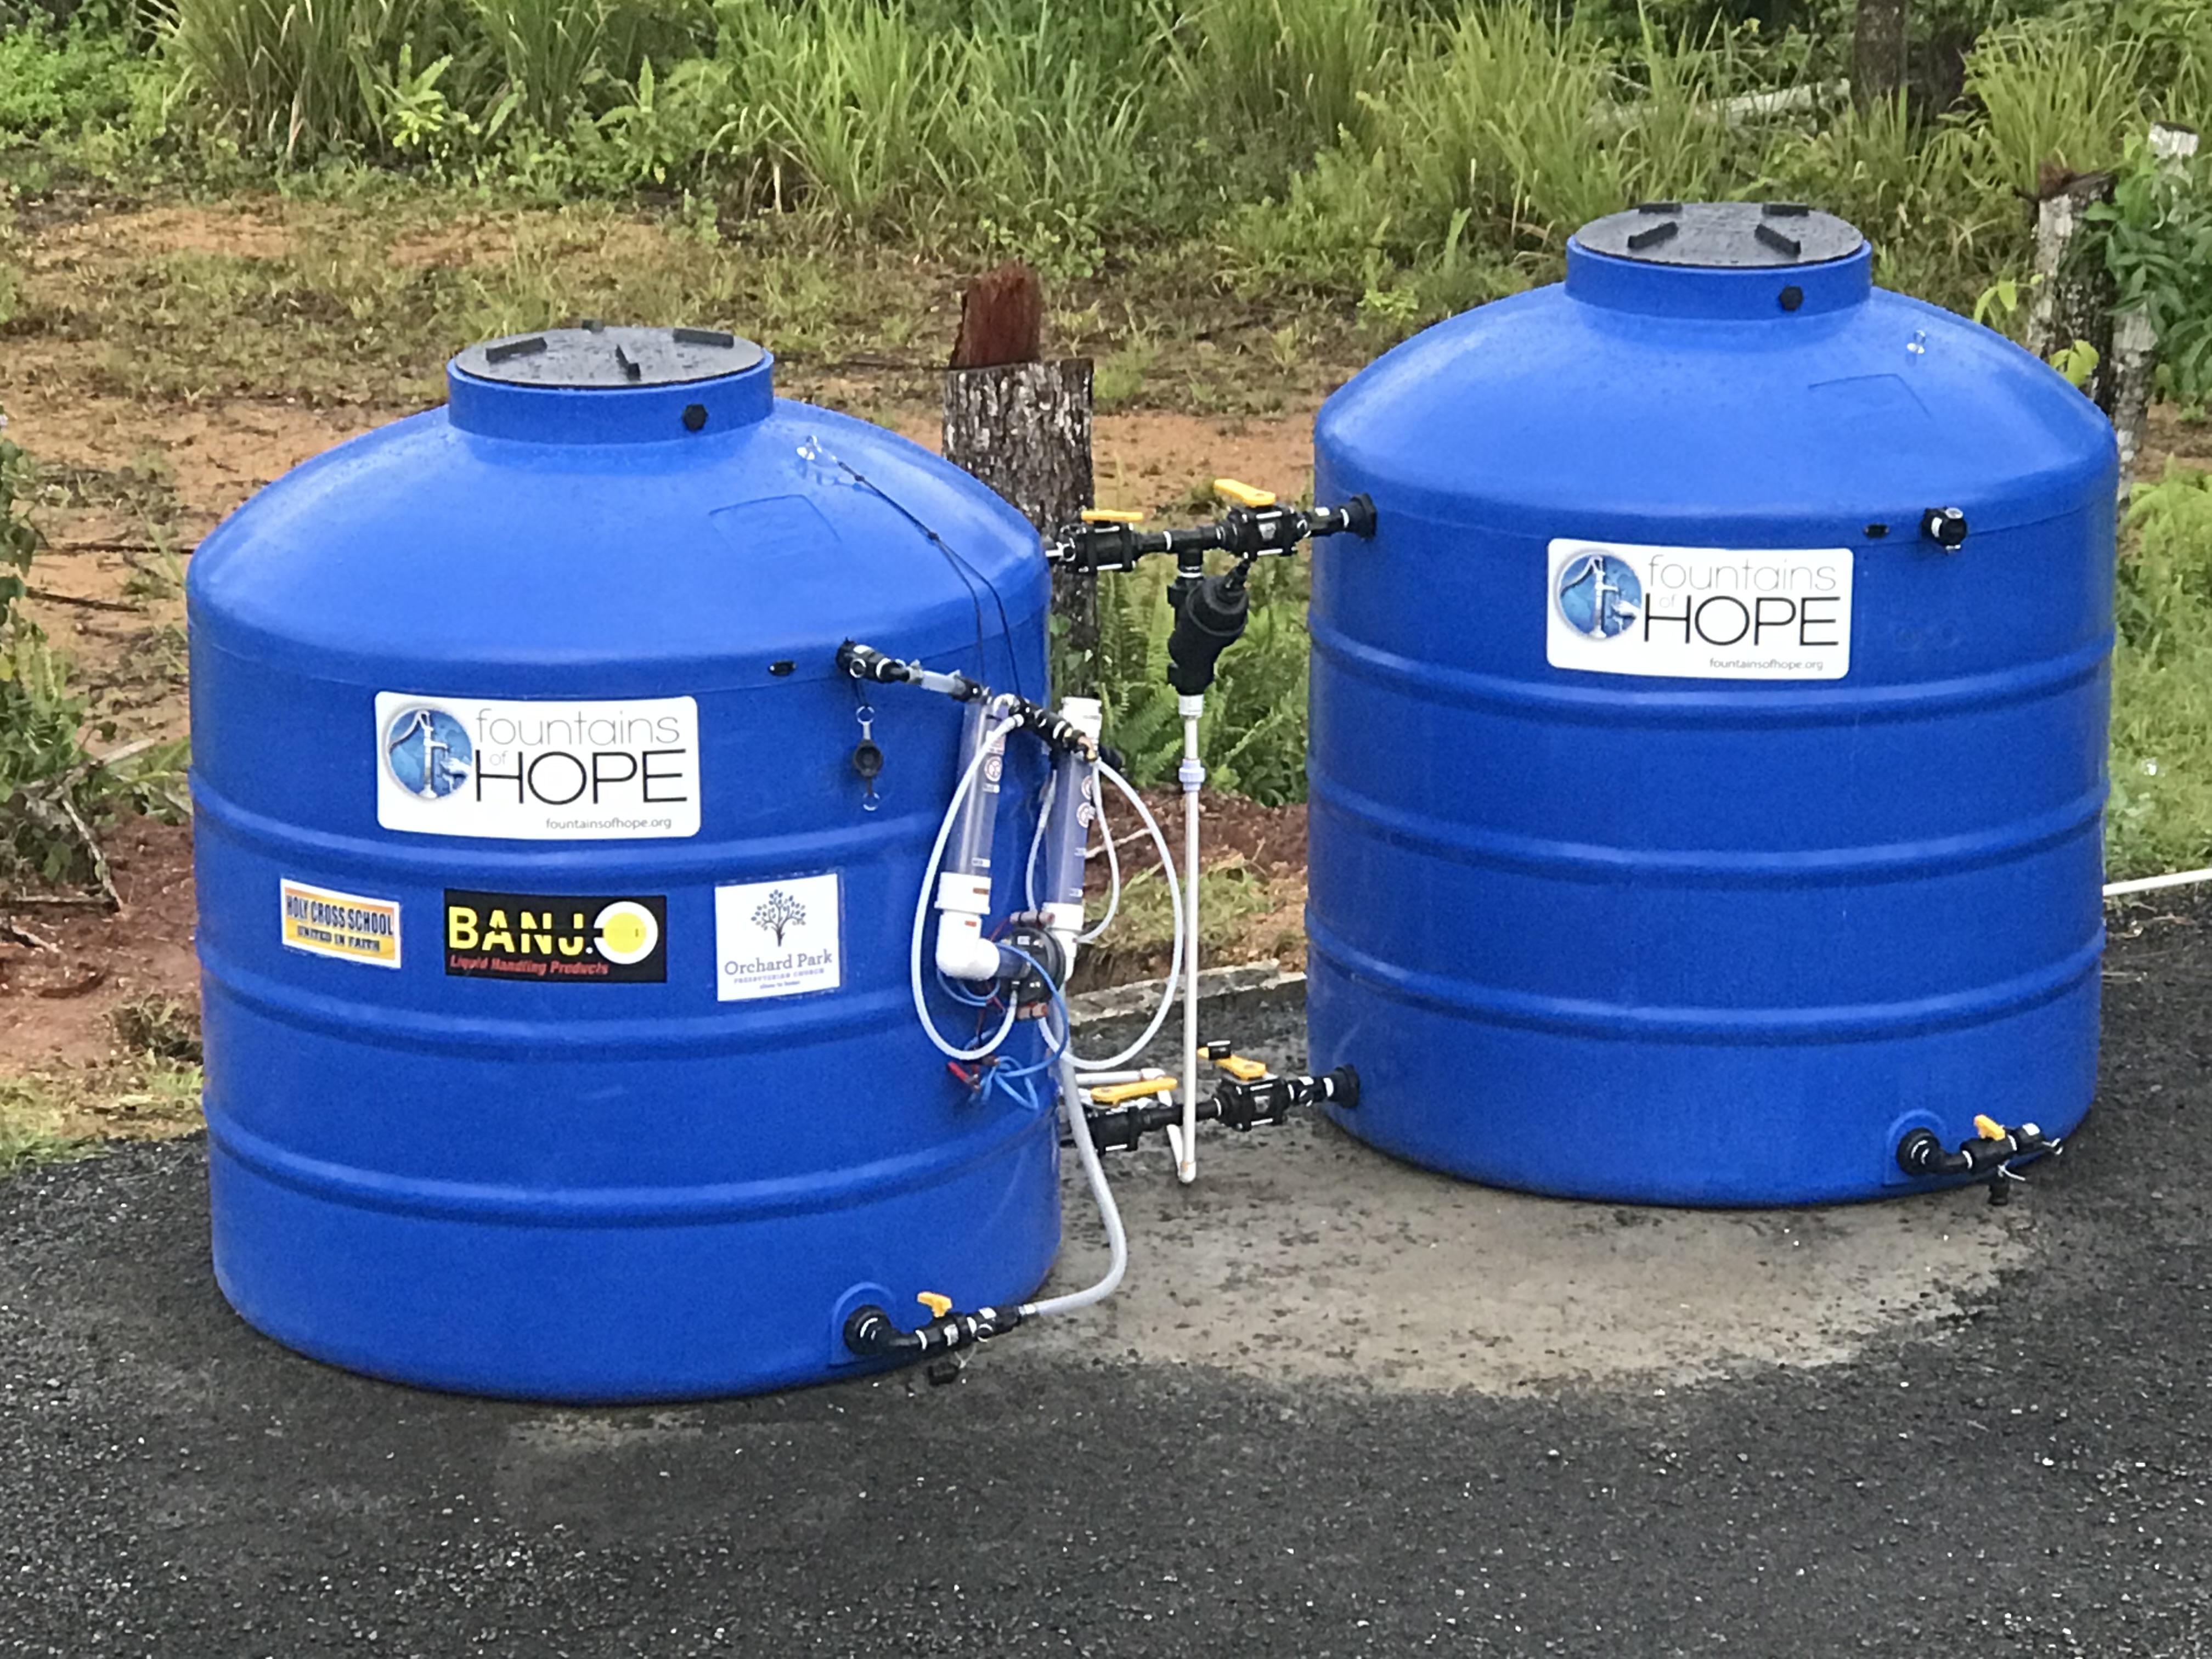 Fountains of Hope Two-Tank Water Purifier System